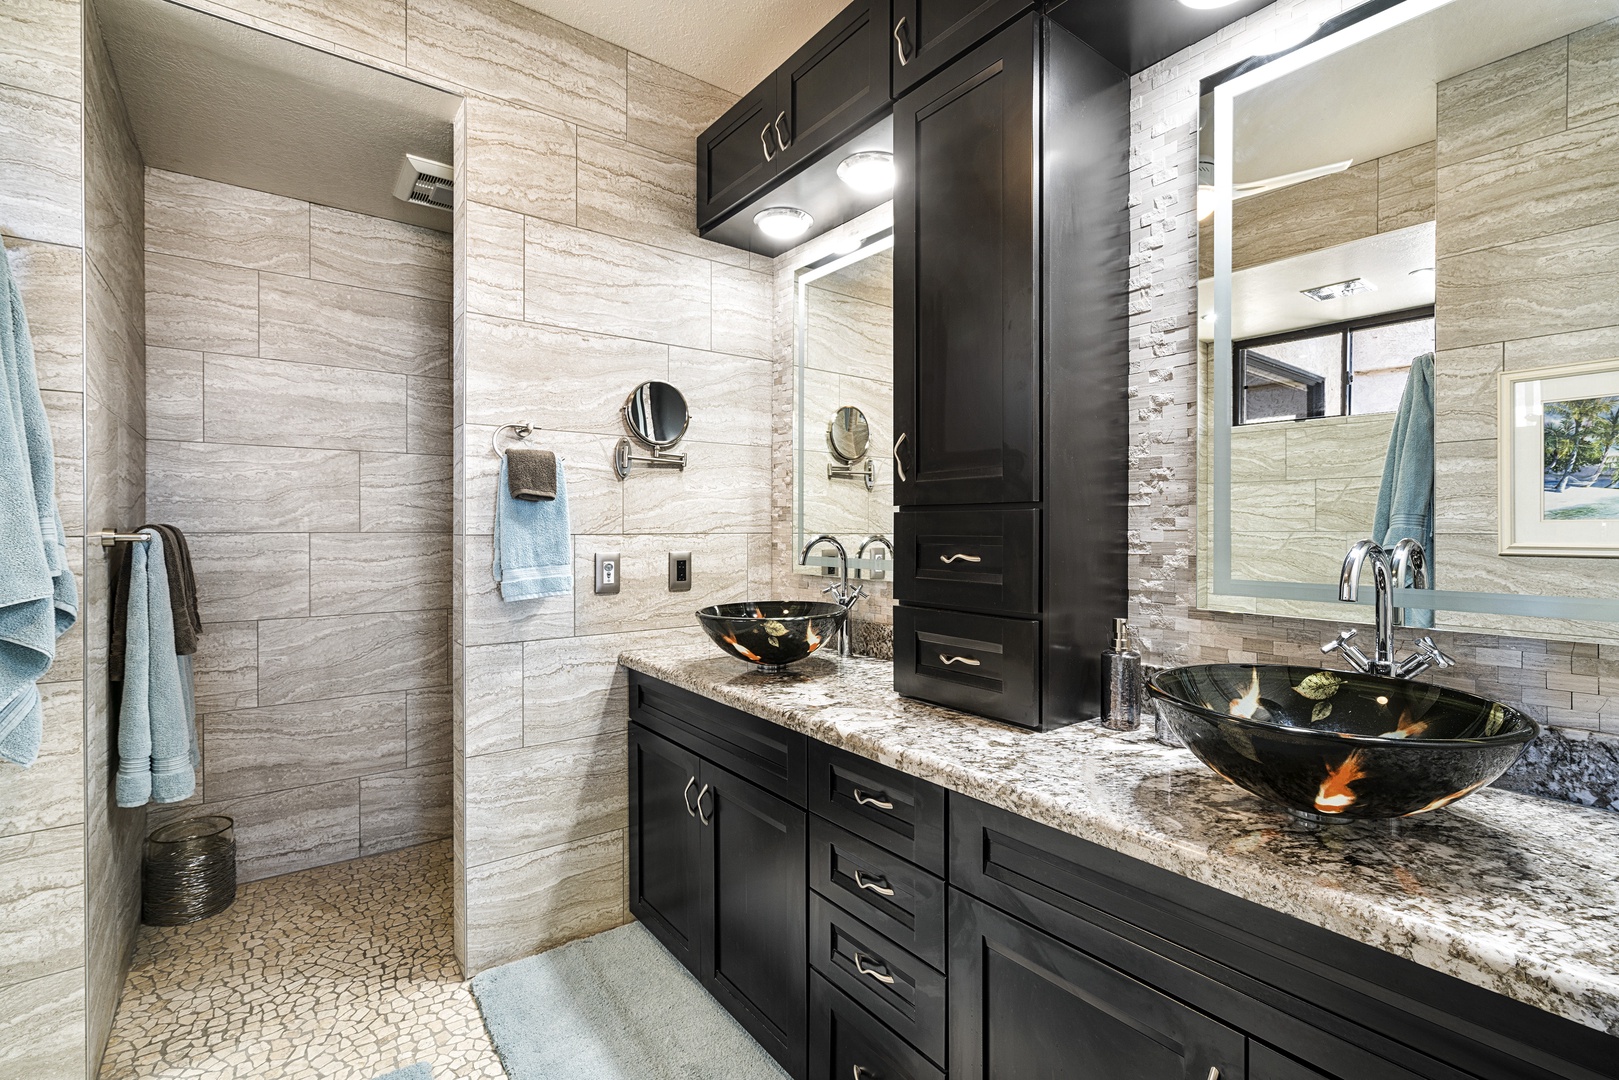 Waikoloa Vacation Rentals, Shores at Waikoloa Beach Resort 332 - Gorgeous Primary bathroom fit for a King or Queen!